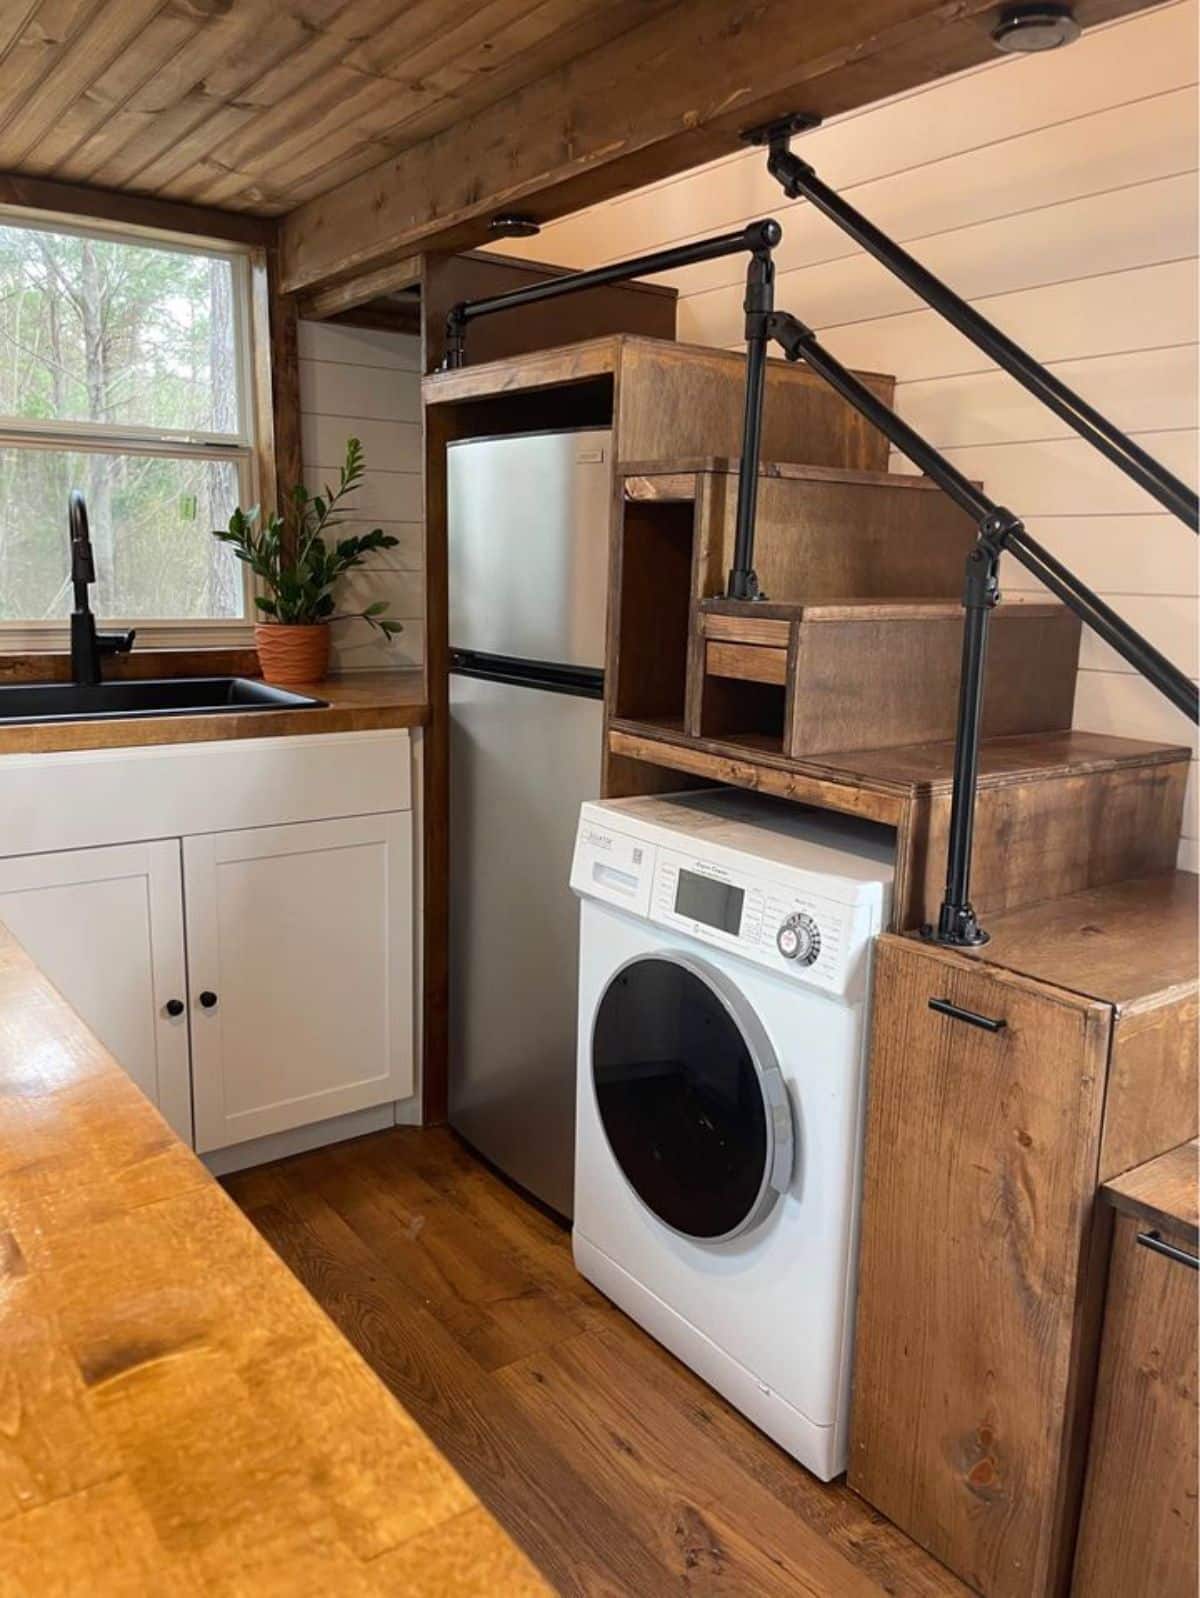 refrigerator and washer dryer combo in the kitchen